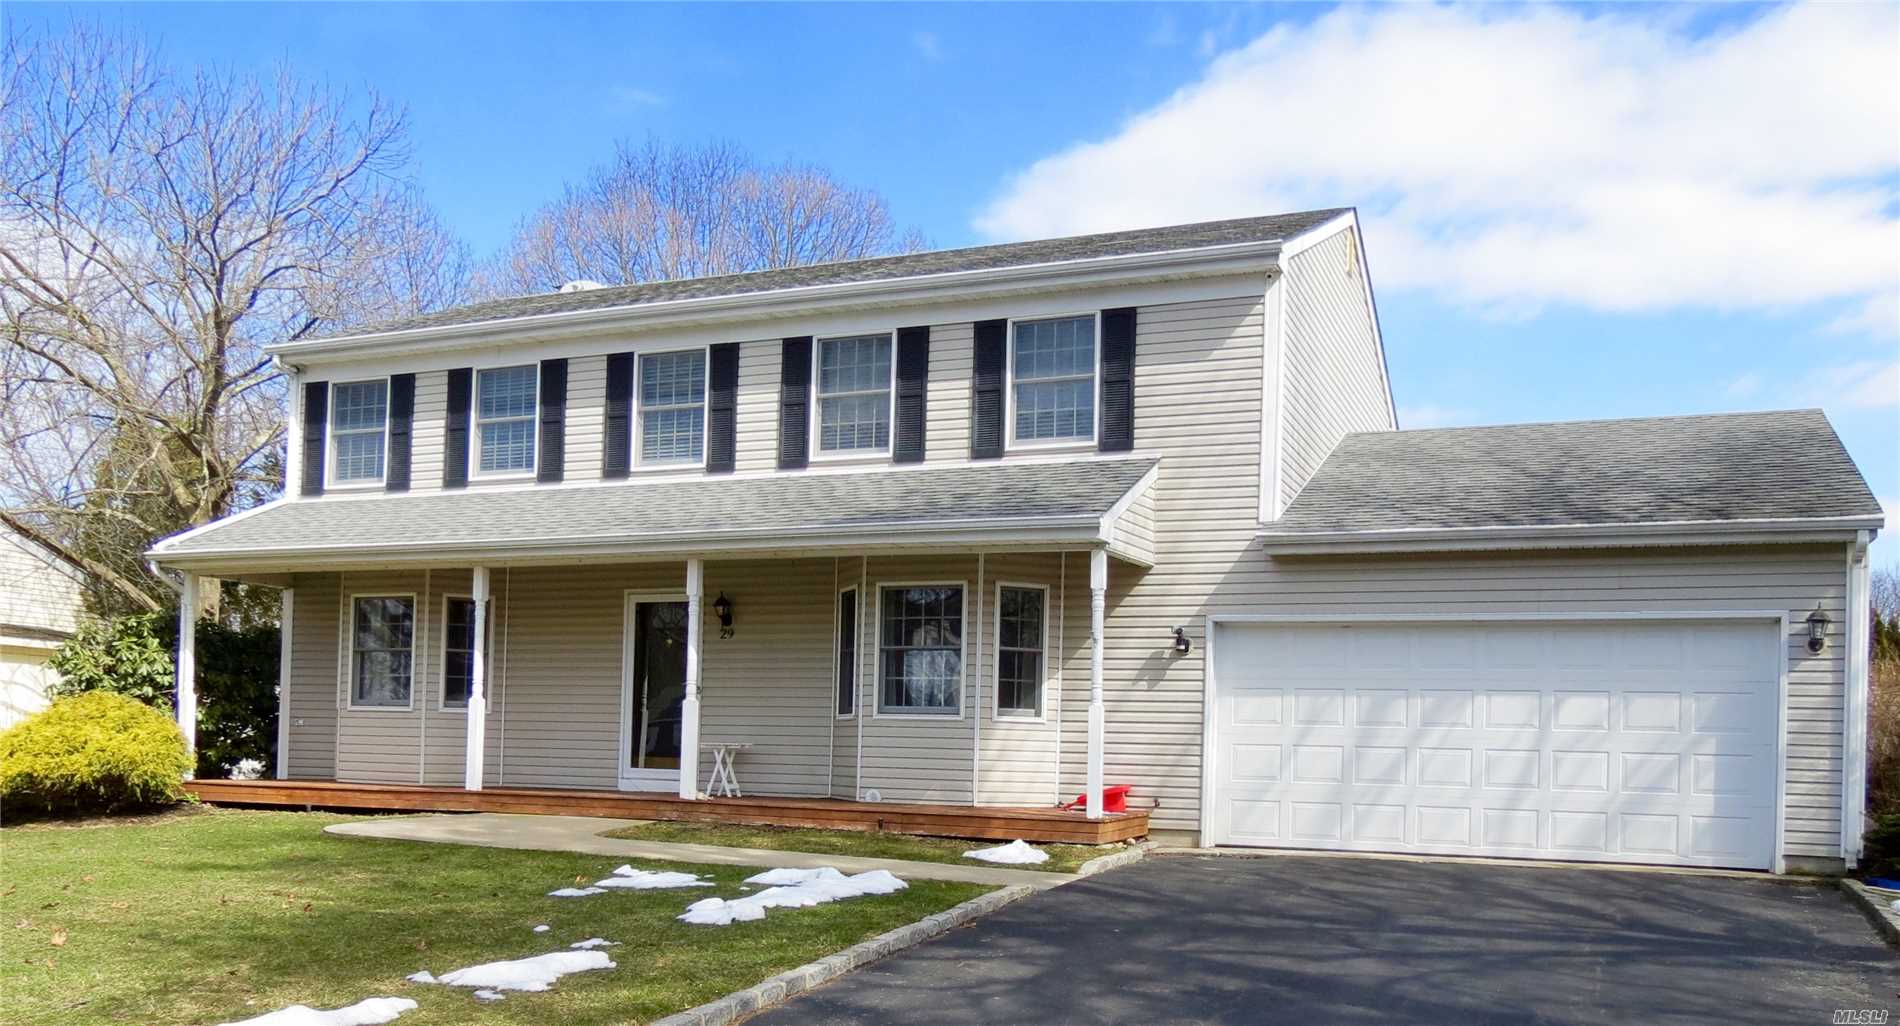 Beautiful Spacious Colonial! Four Bedrooms, Eik, Frml Dr, Fmly Rm W/ Fpl, Lrm W/ Pellet Stove, 2 1/2 Bath, Oak Floors Throughout! Security System! Professionally Landscaped W/Fenced In Backyard W/ Patio Pavers, Inground Pool 6&rsquo; No Diving Board & Separate Hot Tub! Shoreham Wading River Schools! Desirable Neighborhood! Move In Condition! Conveniently Located To Everything!